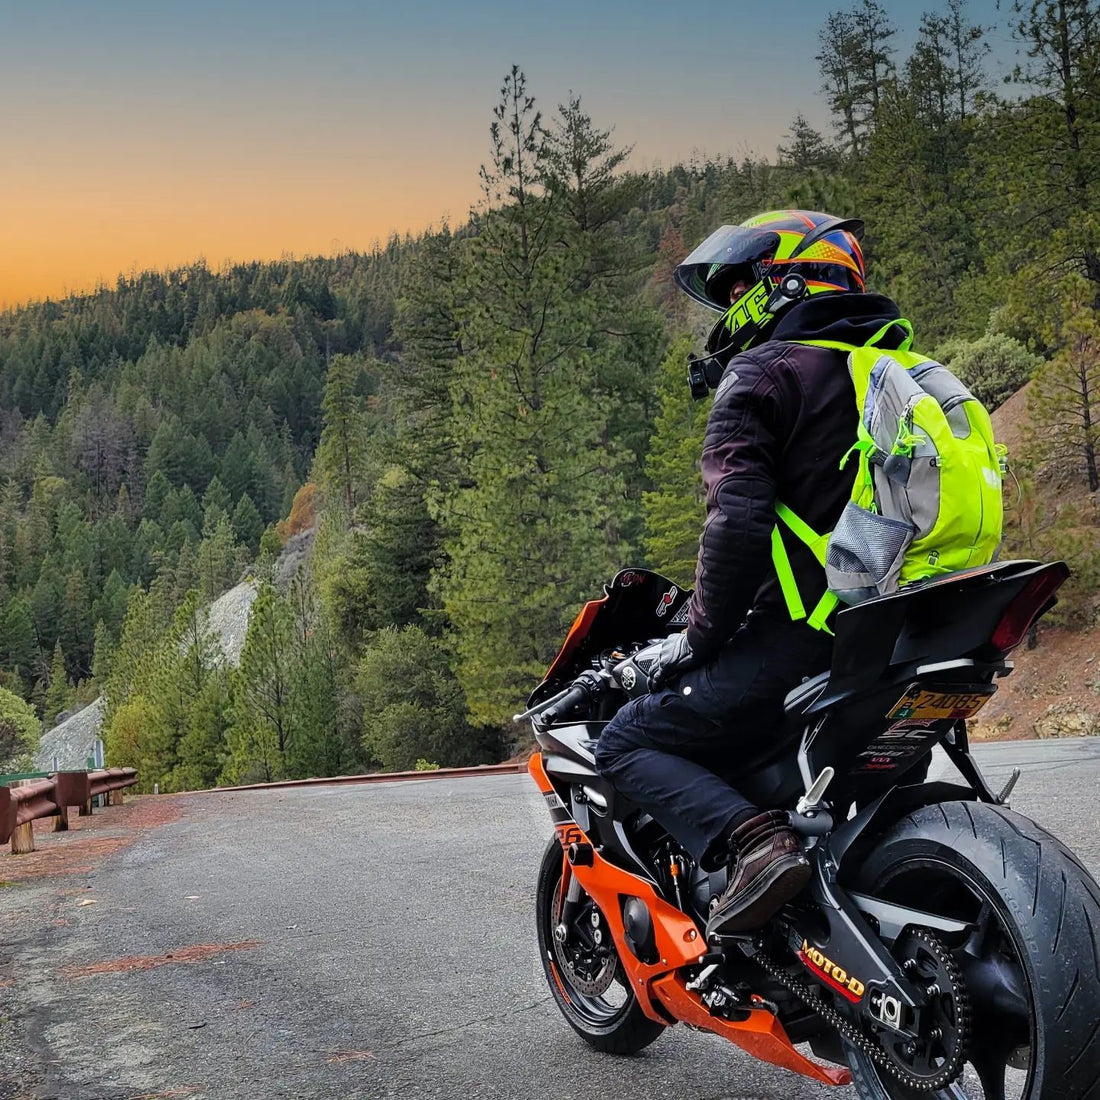 Riding Tips Every Motorcycle Rider Should Know